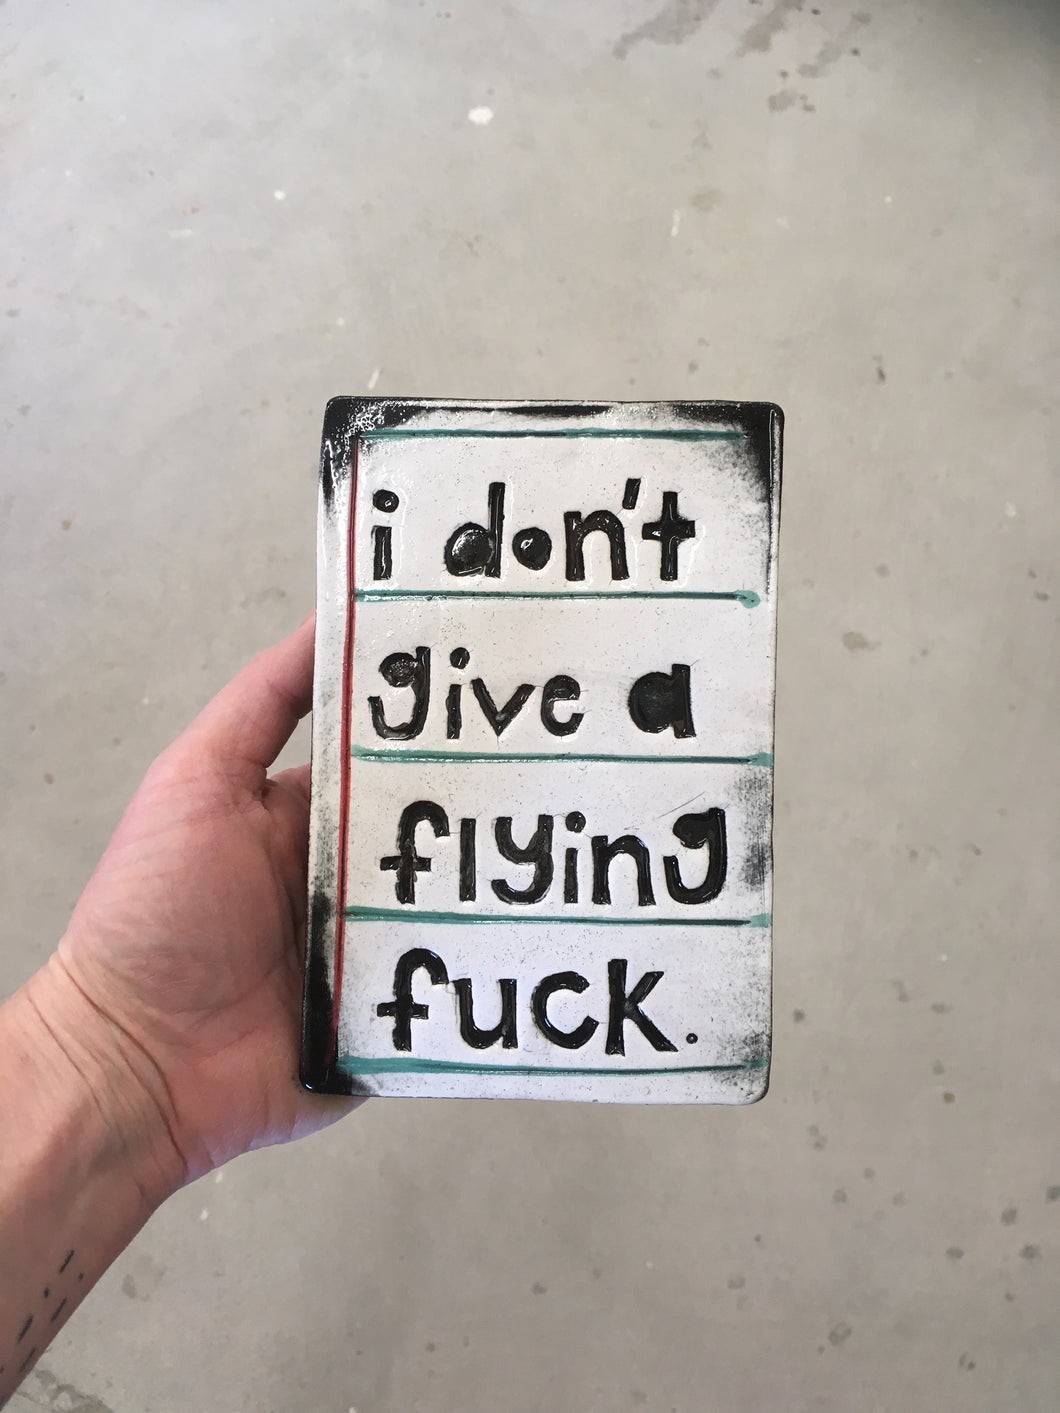 I don’t give a flying fuck tile.